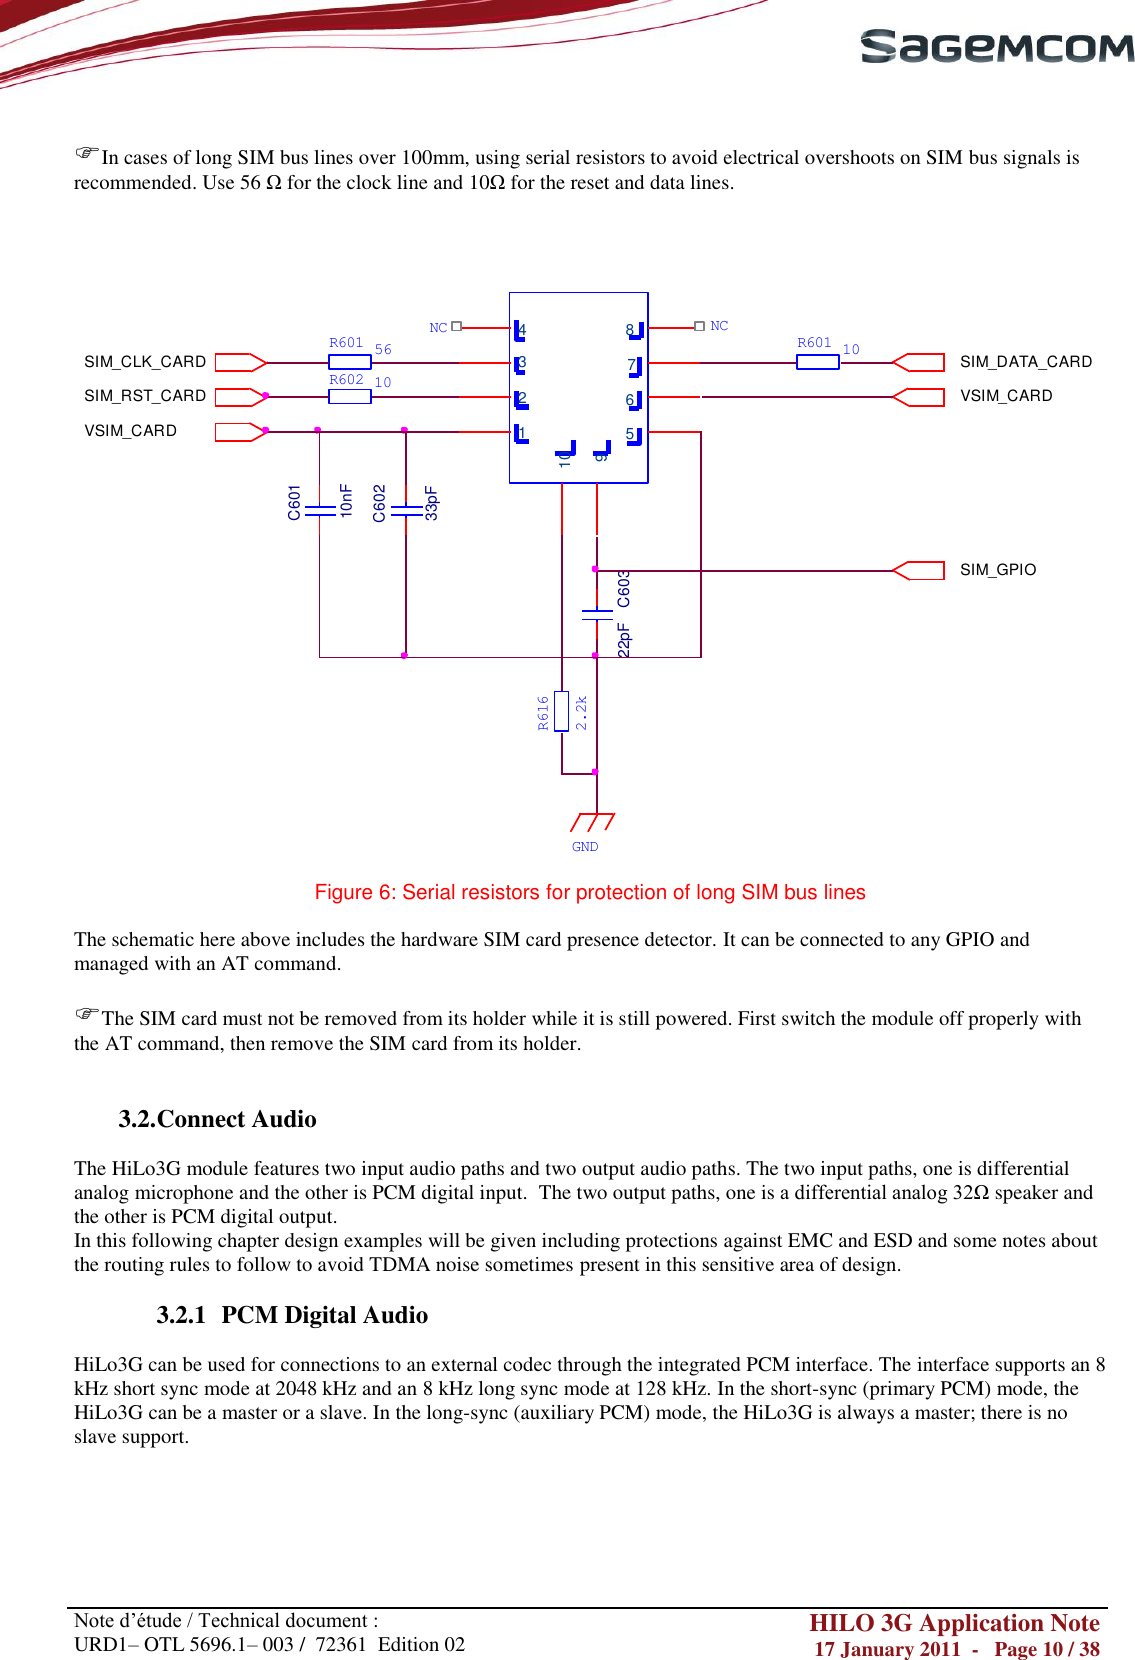       Note d‘étude / Technical document : URD1– OTL 5696.1– 003 /  72361  Edition 02 HILO 3G Application Note 17 January 2011  -   Page 10 / 38     In cases of long SIM bus lines over 100mm, using serial resistors to avoid electrical overshoots on SIM bus signals is recommended. Use 56 Ω for the clock line and 10Ω for the reset and data lines.     1654 8732910SIM_RST_CARDSIM_CLK_CARDVSIM_CARDSIM_DATA_CARDVSIM_CARDSIM_GPIOC60110nFC60233pFC60322pFR601R602561010R601NCNC2.2kR616GND  Figure 6: Serial resistors for protection of long SIM bus lines  The schematic here above includes the hardware SIM card presence detector. It can be connected to any GPIO and managed with an AT command.  The SIM card must not be removed from its holder while it is still powered. First switch the module off properly with the AT command, then remove the SIM card from its holder.   3.2. Connect Audio  The HiLo3G module features two input audio paths and two output audio paths. The two input paths, one is differential analog microphone and the other is PCM digital input.  The two output paths, one is a differential analog 32Ω speaker and the other is PCM digital output. In this following chapter design examples will be given including protections against EMC and ESD and some notes about the routing rules to follow to avoid TDMA noise sometimes present in this sensitive area of design.  3.2.1 PCM Digital Audio  HiLo3G can be used for connections to an external codec through the integrated PCM interface. The interface supports an 8 kHz short sync mode at 2048 kHz and an 8 kHz long sync mode at 128 kHz. In the short-sync (primary PCM) mode, the HiLo3G can be a master or a slave. In the long-sync (auxiliary PCM) mode, the HiLo3G is always a master; there is no slave support.   